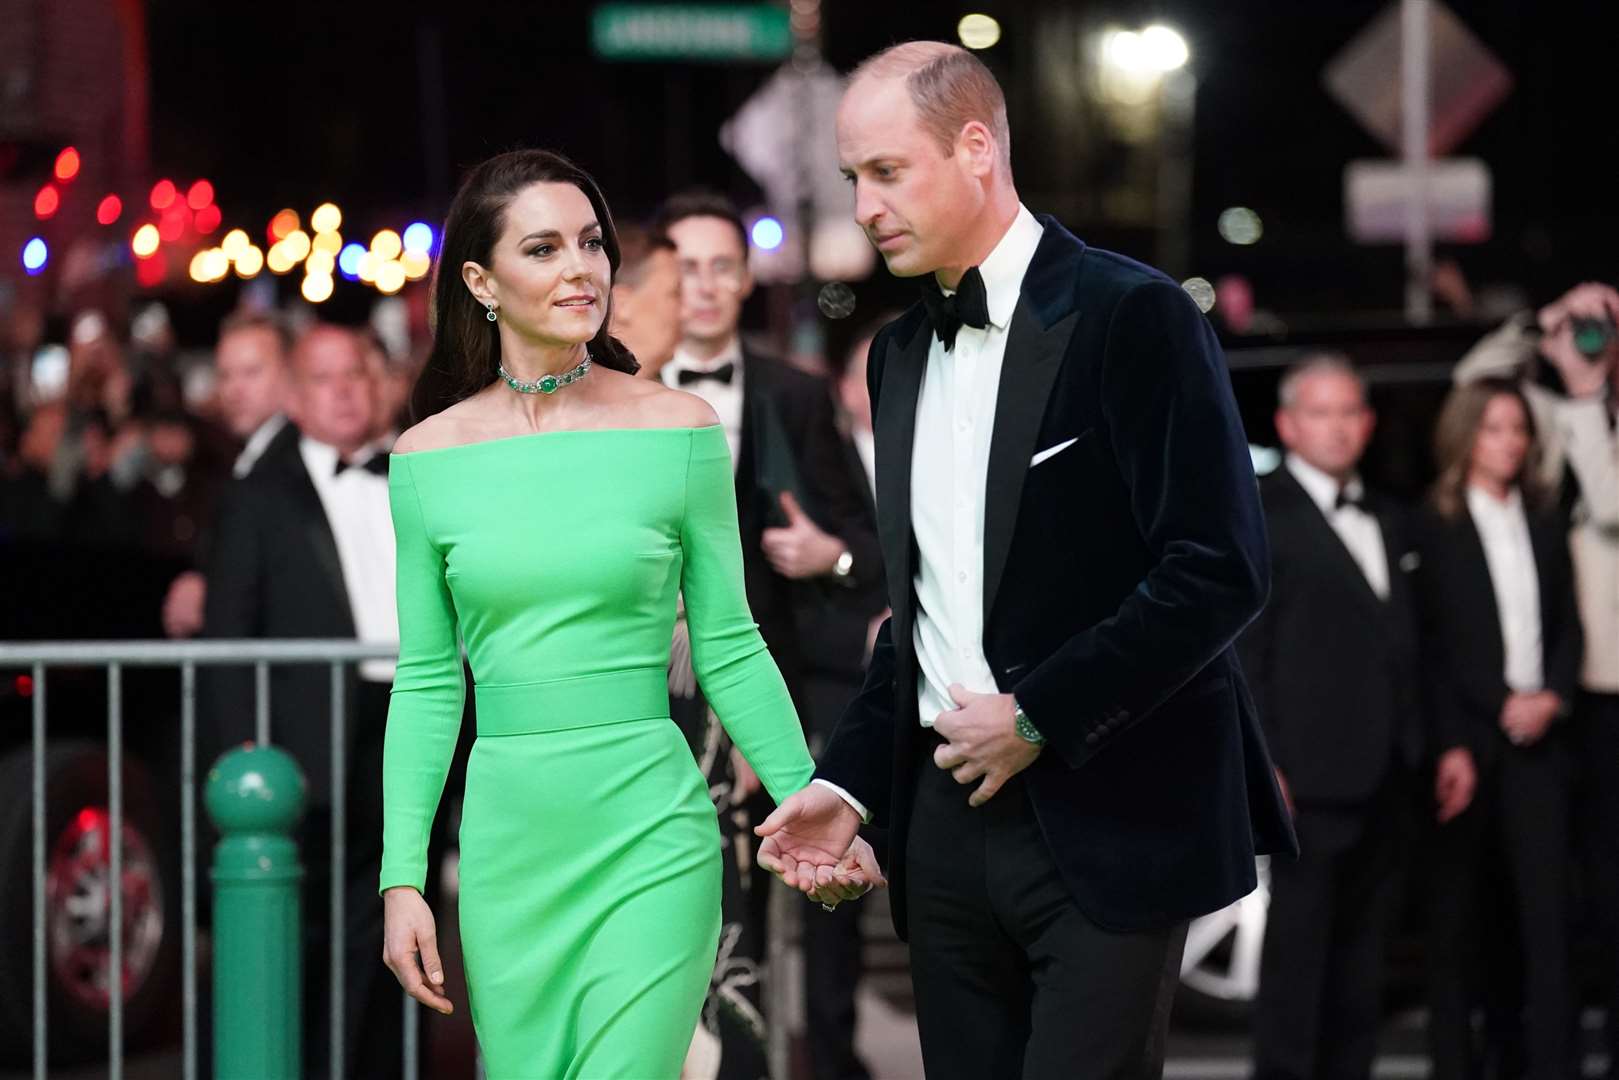 The Prince and Princess of Wales walk the green carpet at the 2022 Earthshot Prize awards (Kirsty O’Connor/PA)